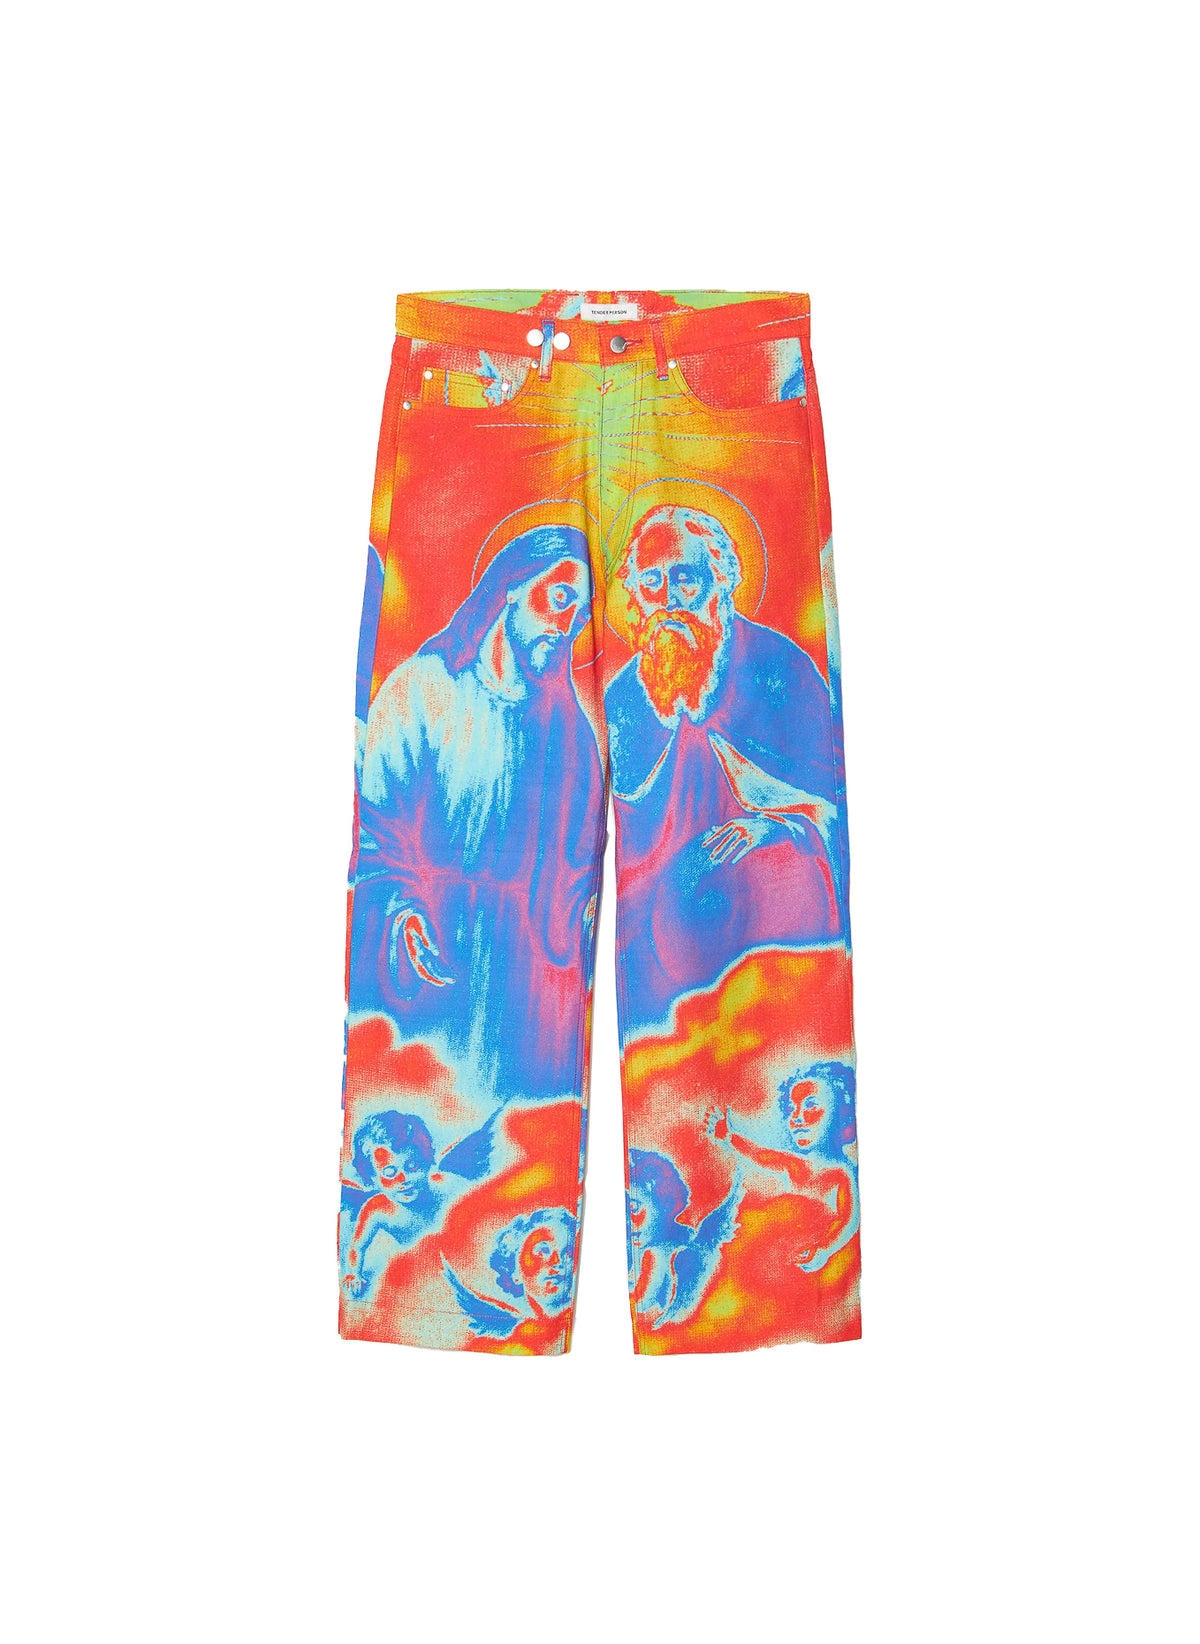 <span style="color: #f50b0b;">Last One</span> TENDER PERSON / ANGEL DENIM PANTS THERMOGRAPHY